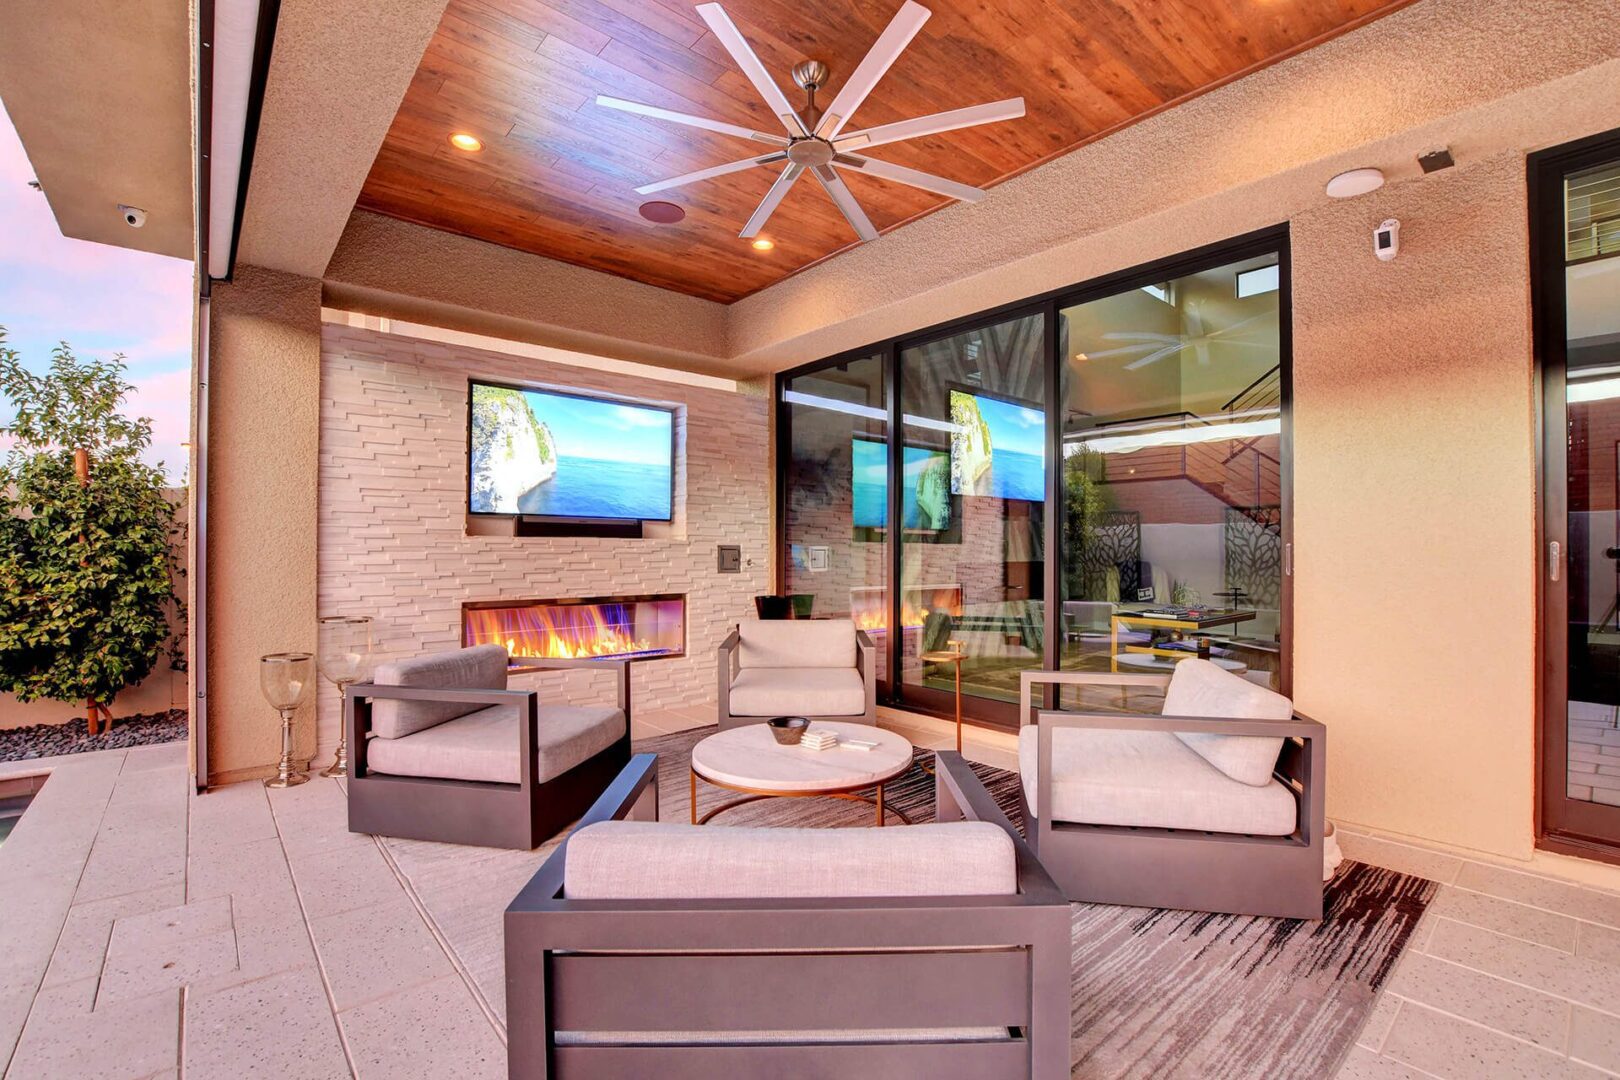 Custom Outdoor Fireplace and Media Wall with recessed flat-screen TV by Custom Outdoor Living of Las Vegas, Nevada